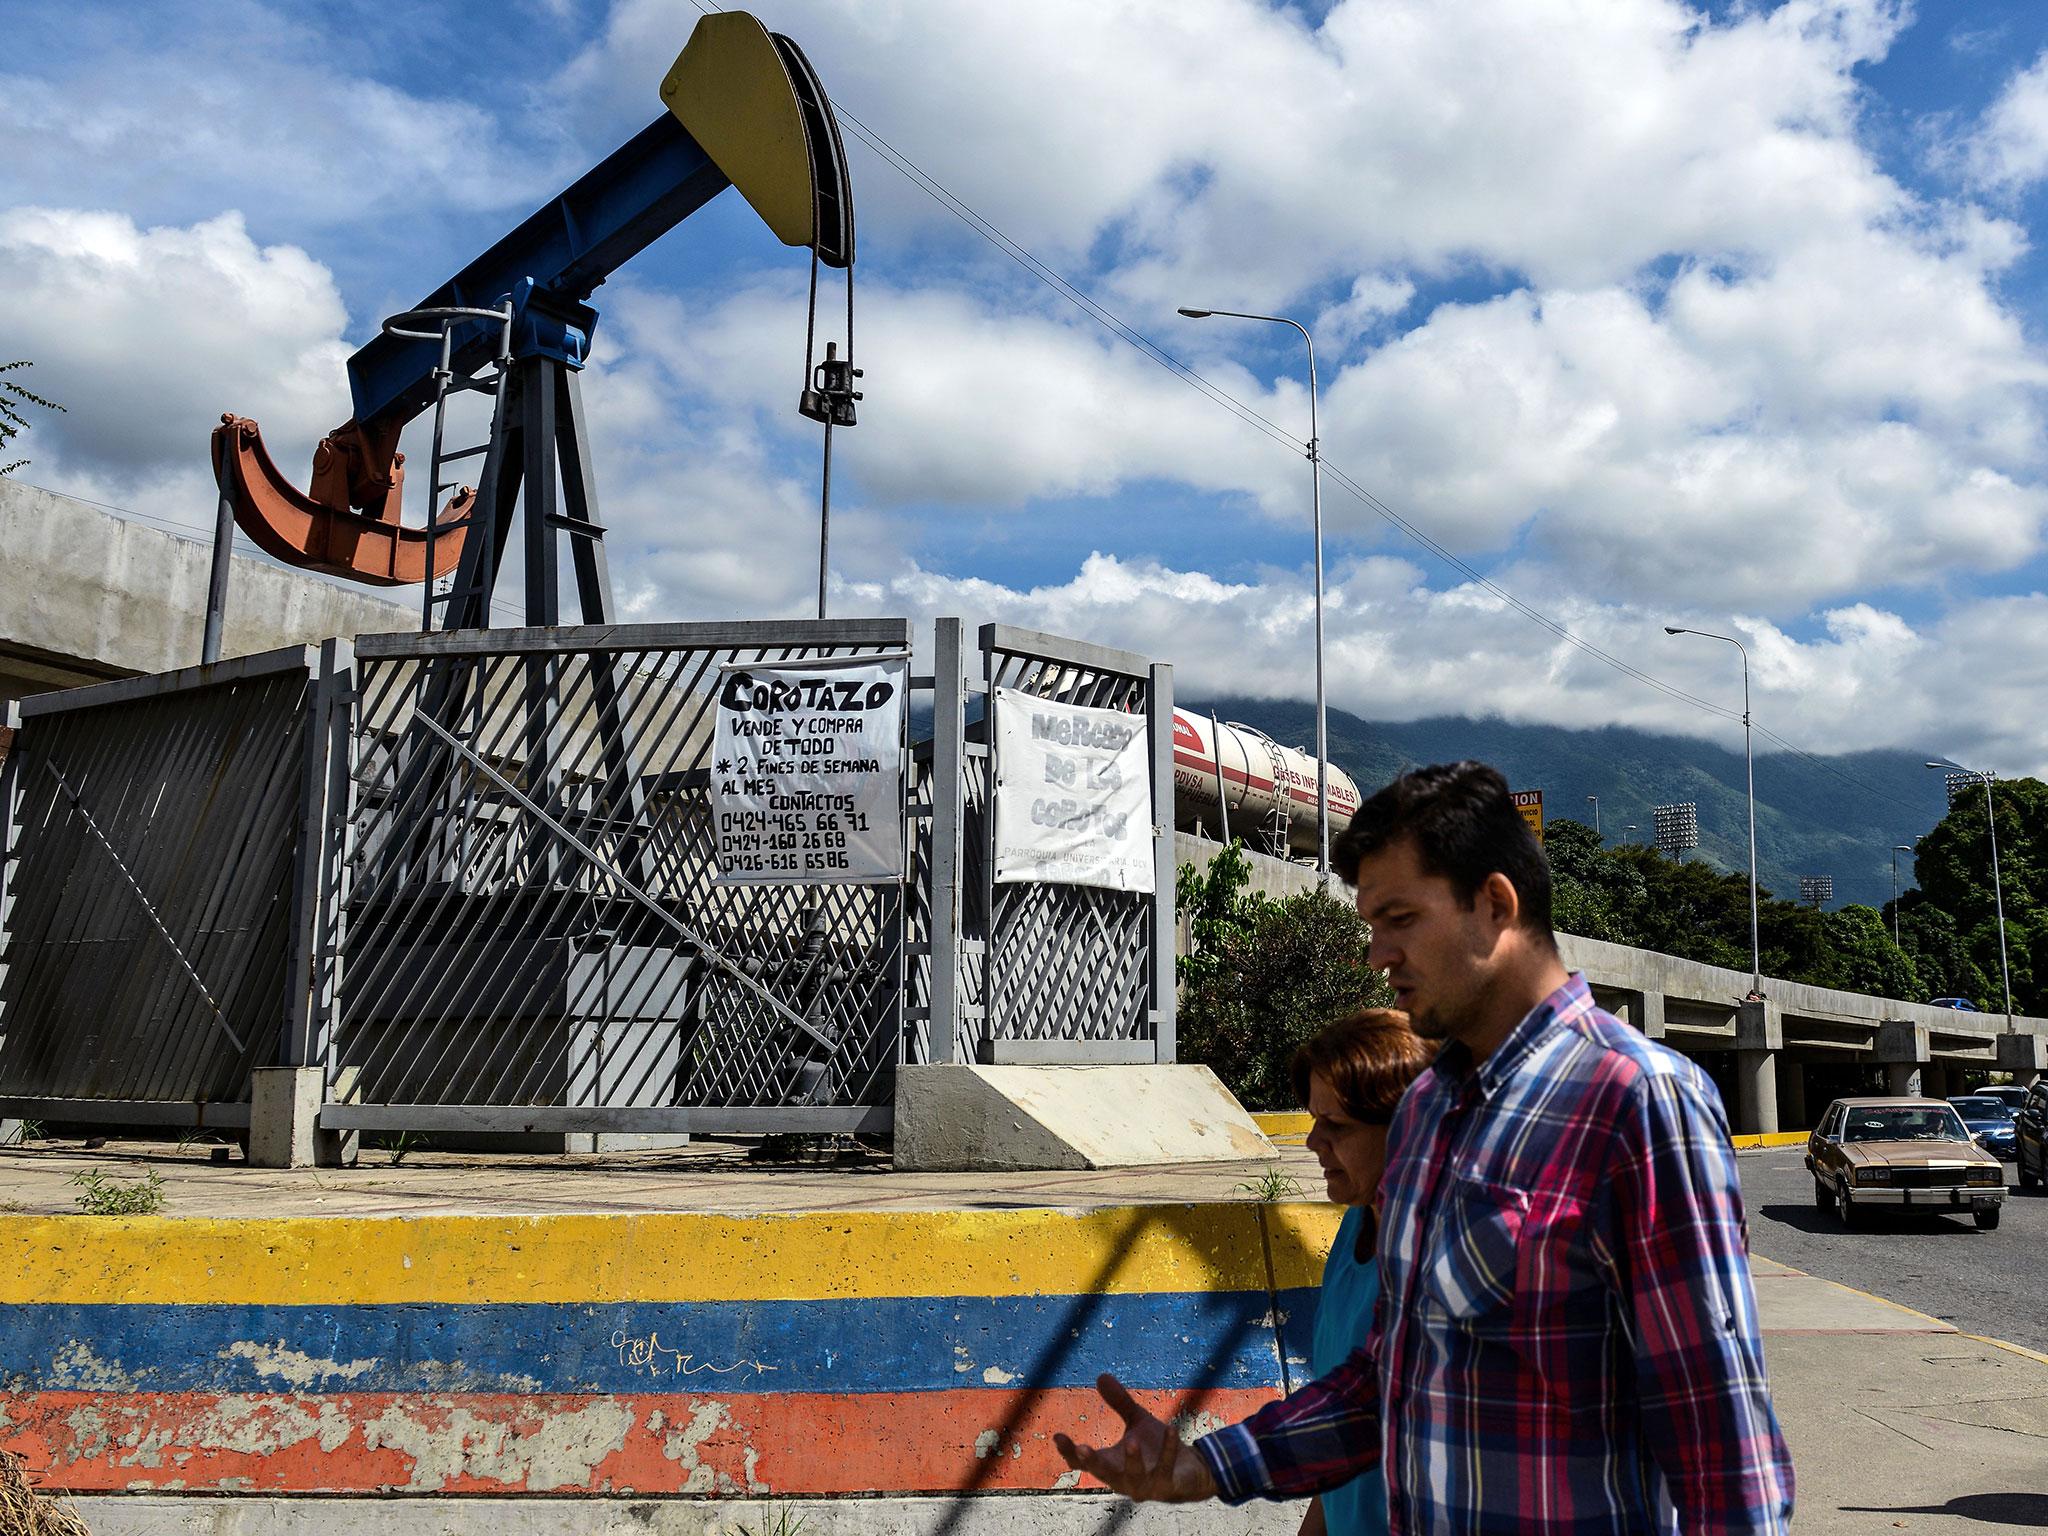 People walk by a small square with an oil pump in one of the access roads to the Central University of Venezuela, Caracas